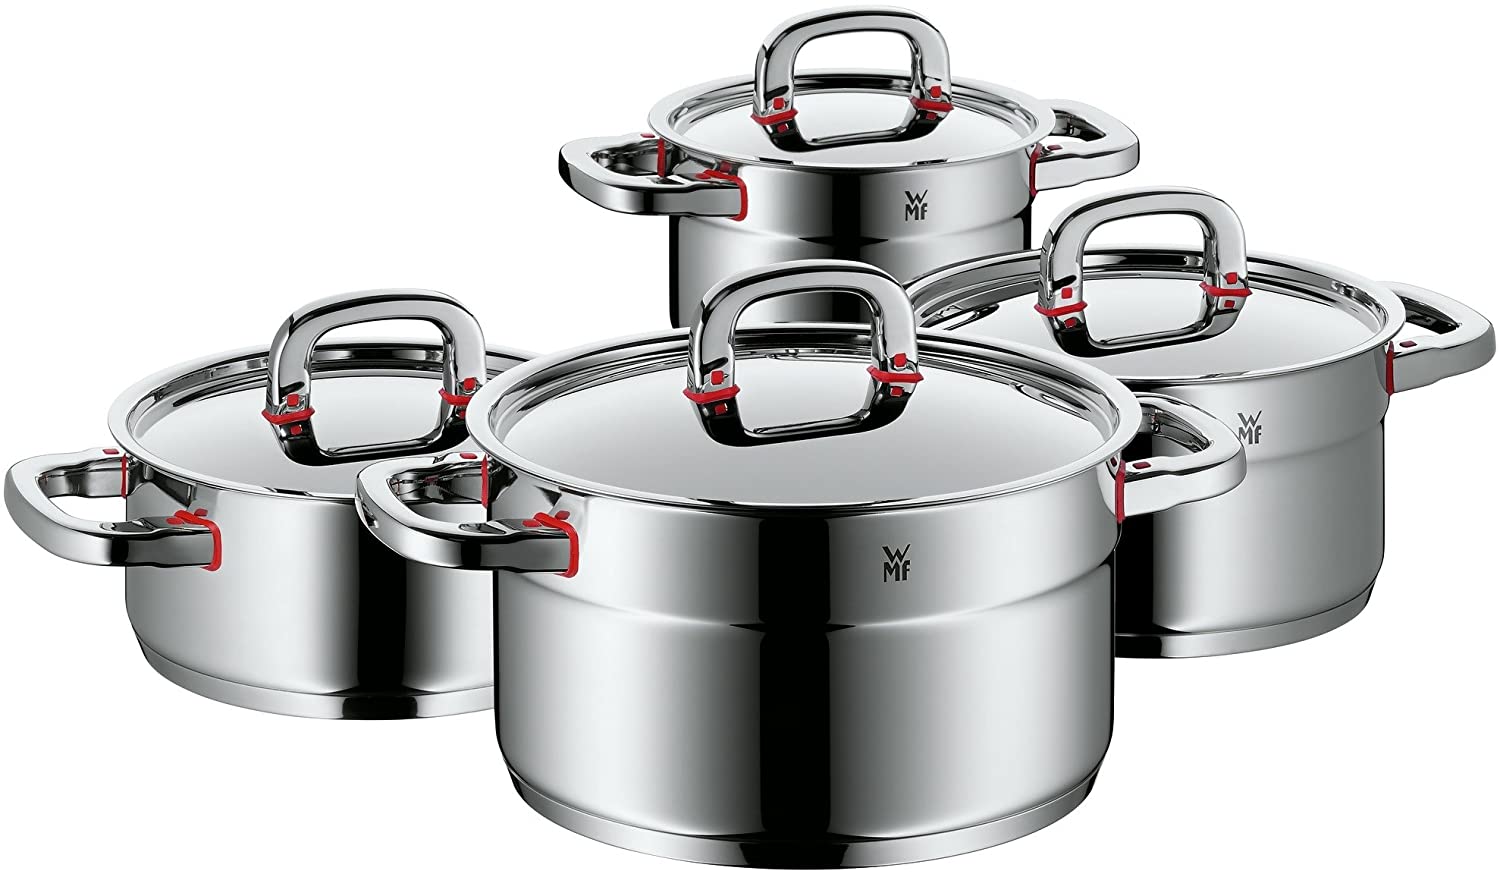 WMF cookware set 4-piece Premium One Inside scaling vapor hole Cool+ Technology metal lid Cromargan stainless steel brushed suitable for all stove tops including induction dishwasher-safe